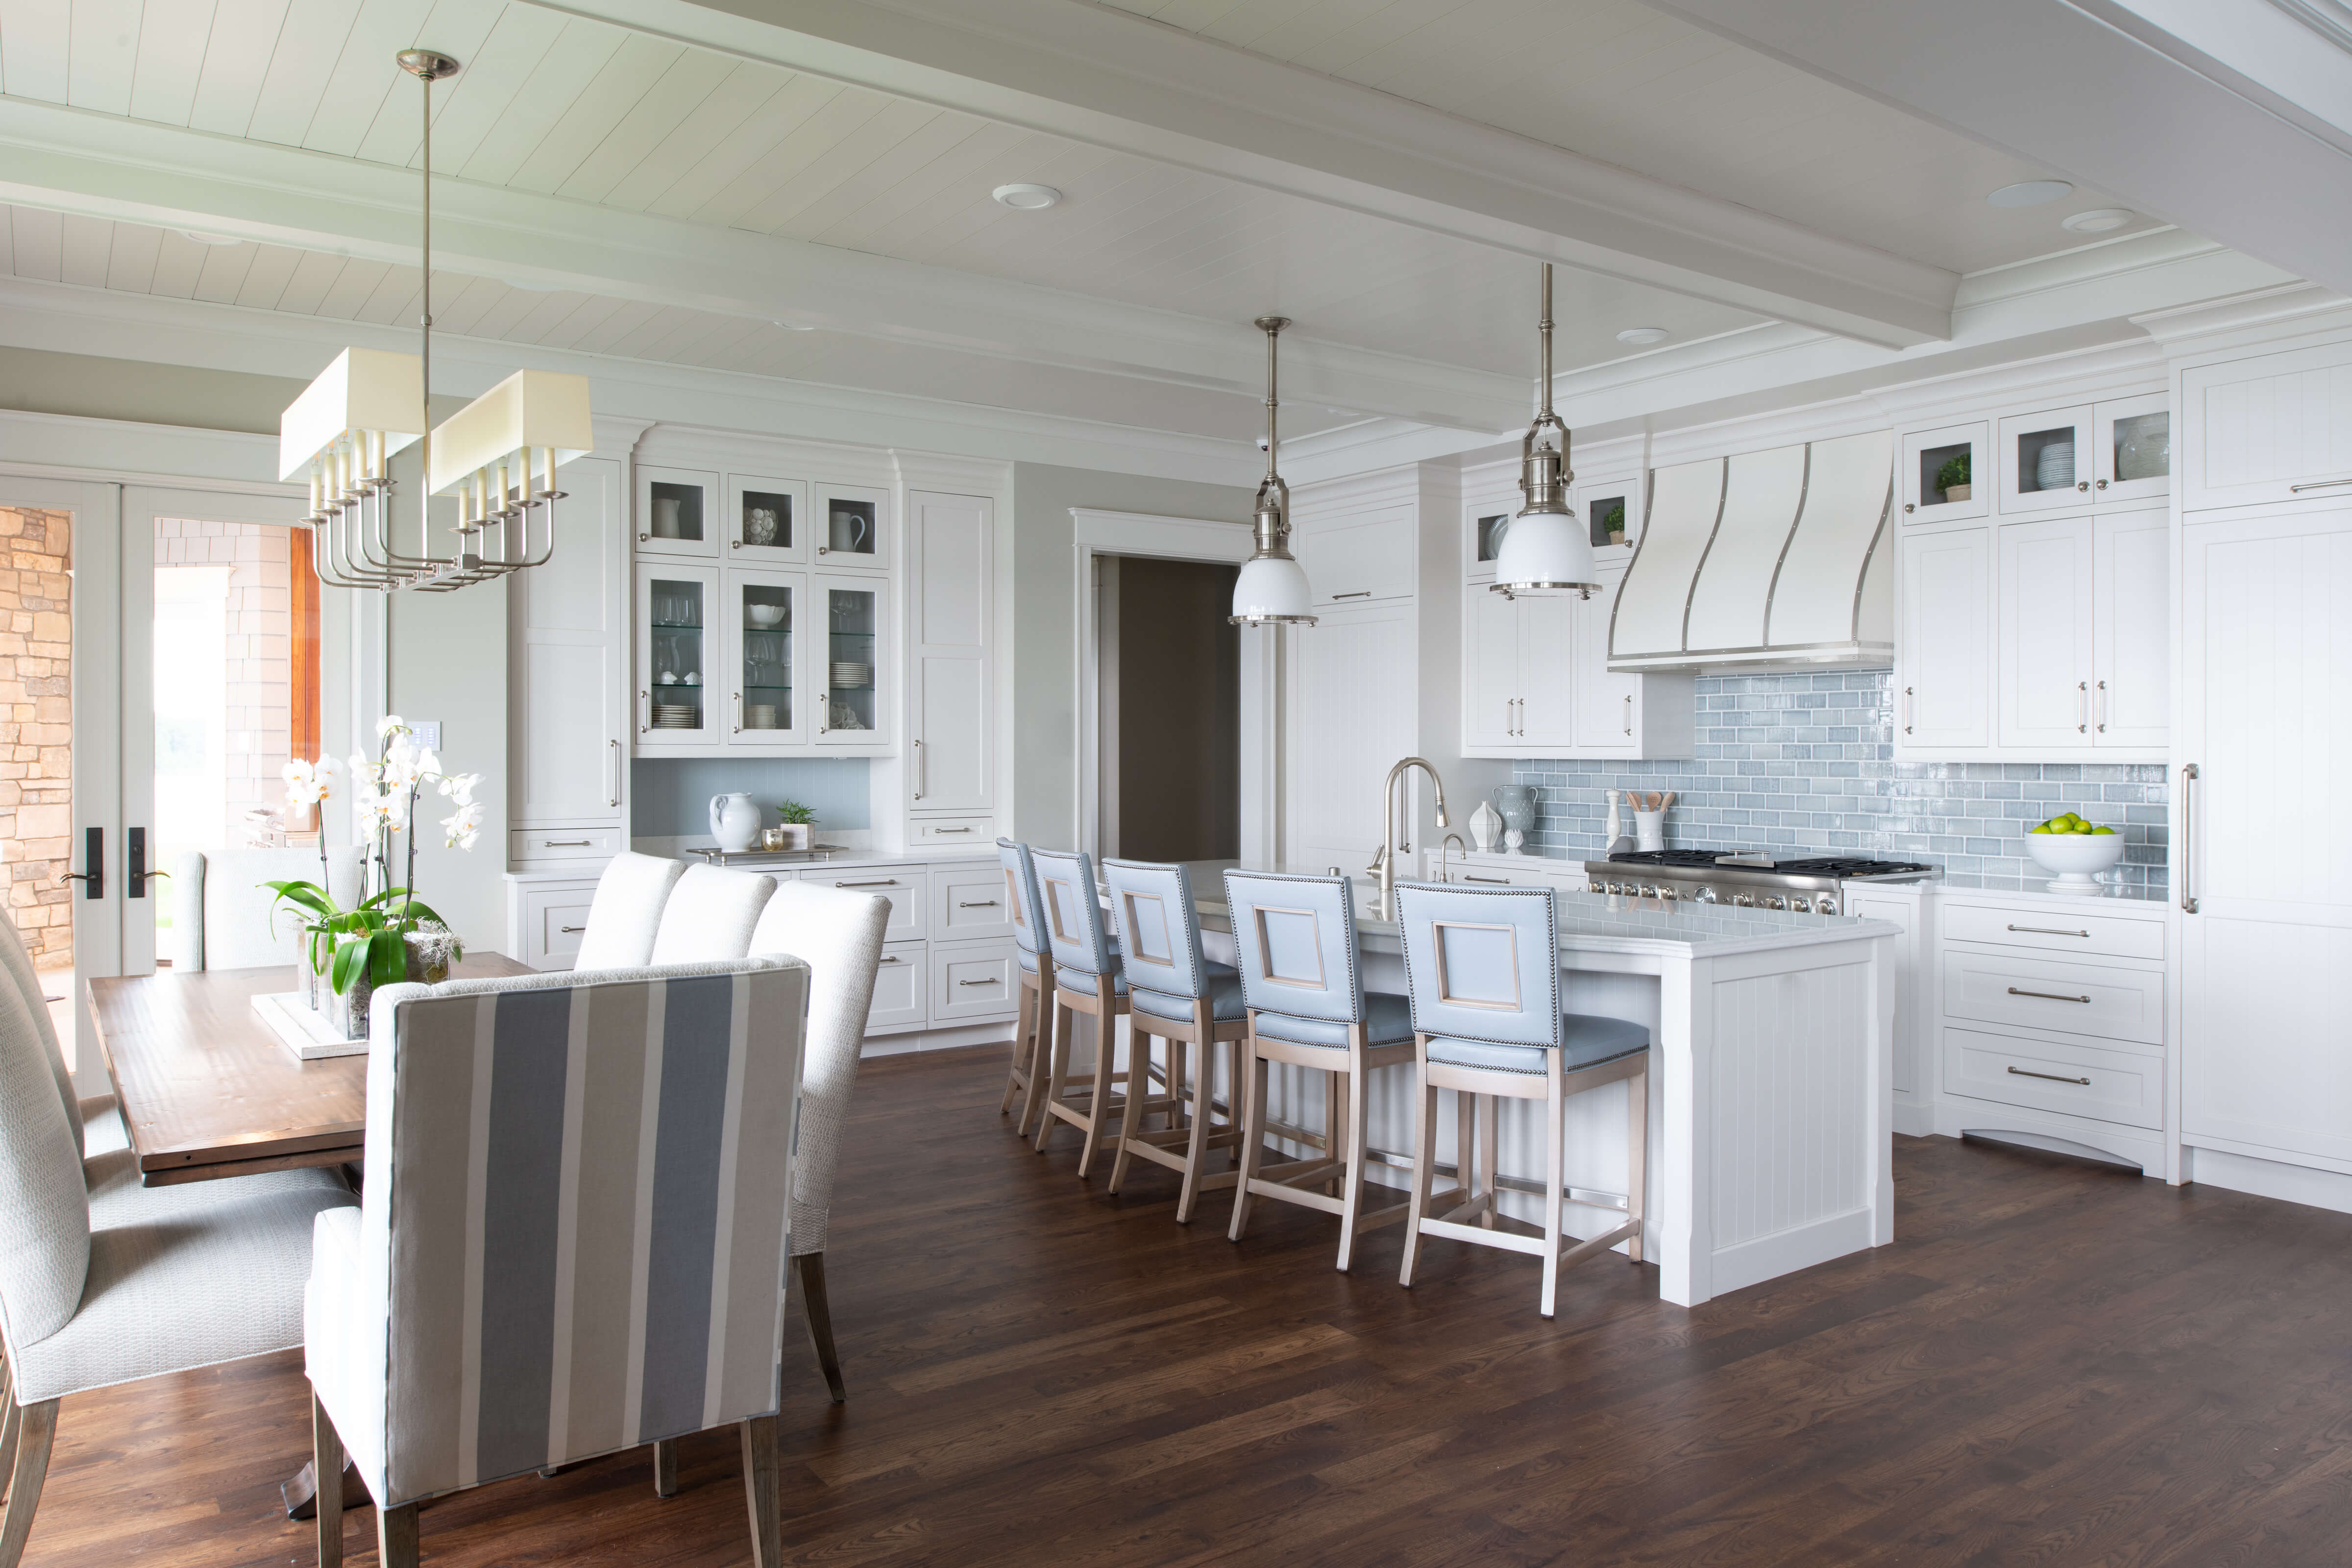 This fabulous, East coast, shingle styled home is full of inspiring design details! This new construction kitchen and scullery uses a combination of Dura Supreme’s Highland door style in both Inset and full overlay in the “Linen White” paint finish.